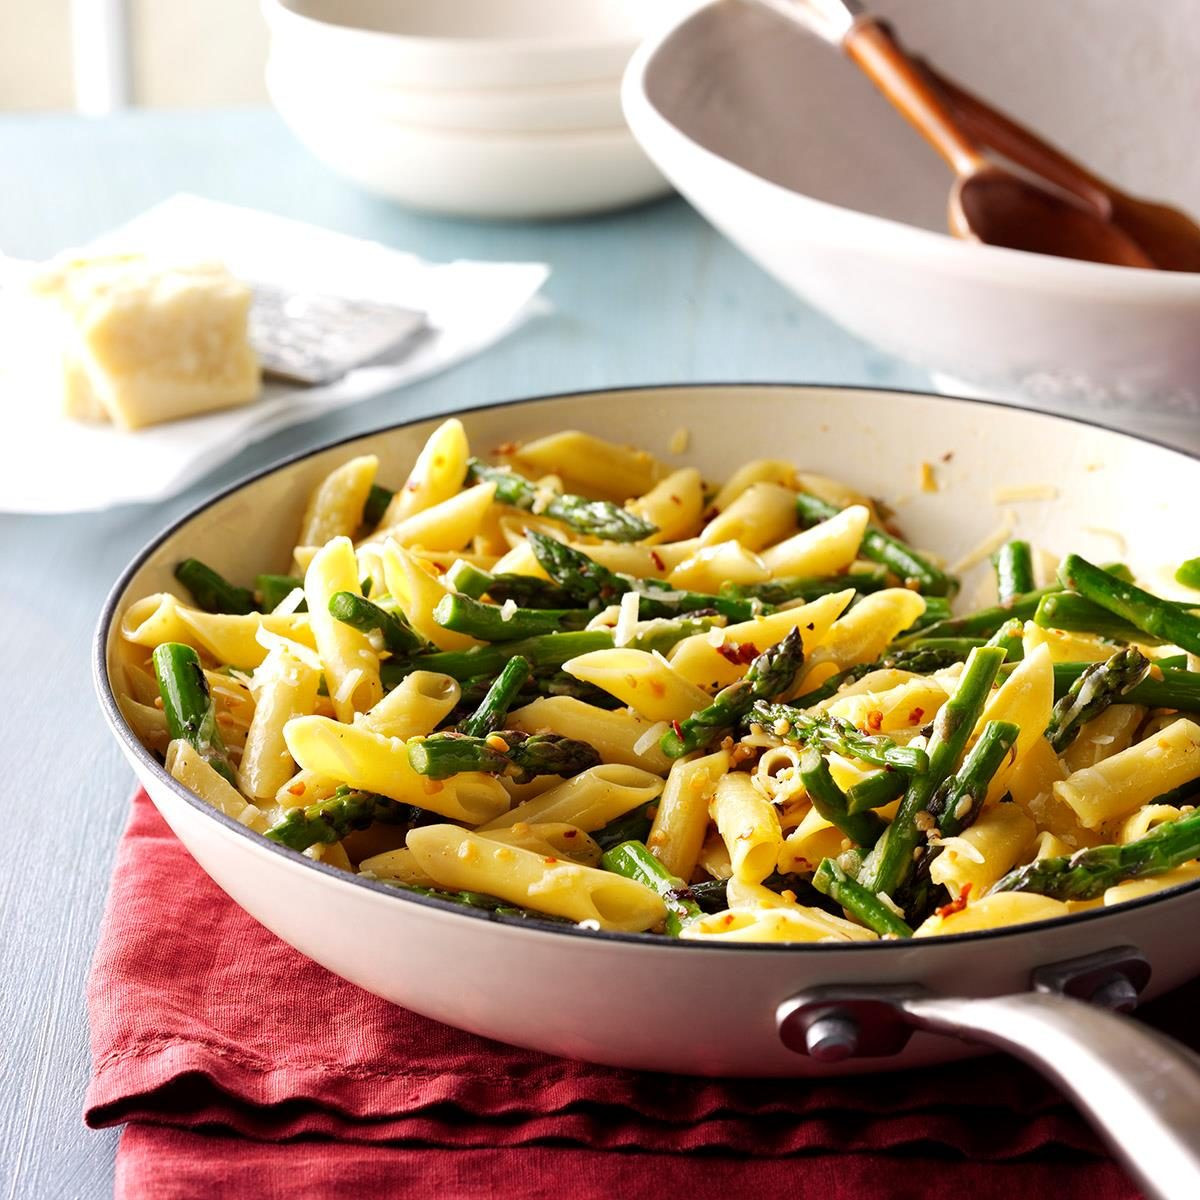 Asparagus and Pasta Luxury Pasta with asparagus Recipe How to Make It